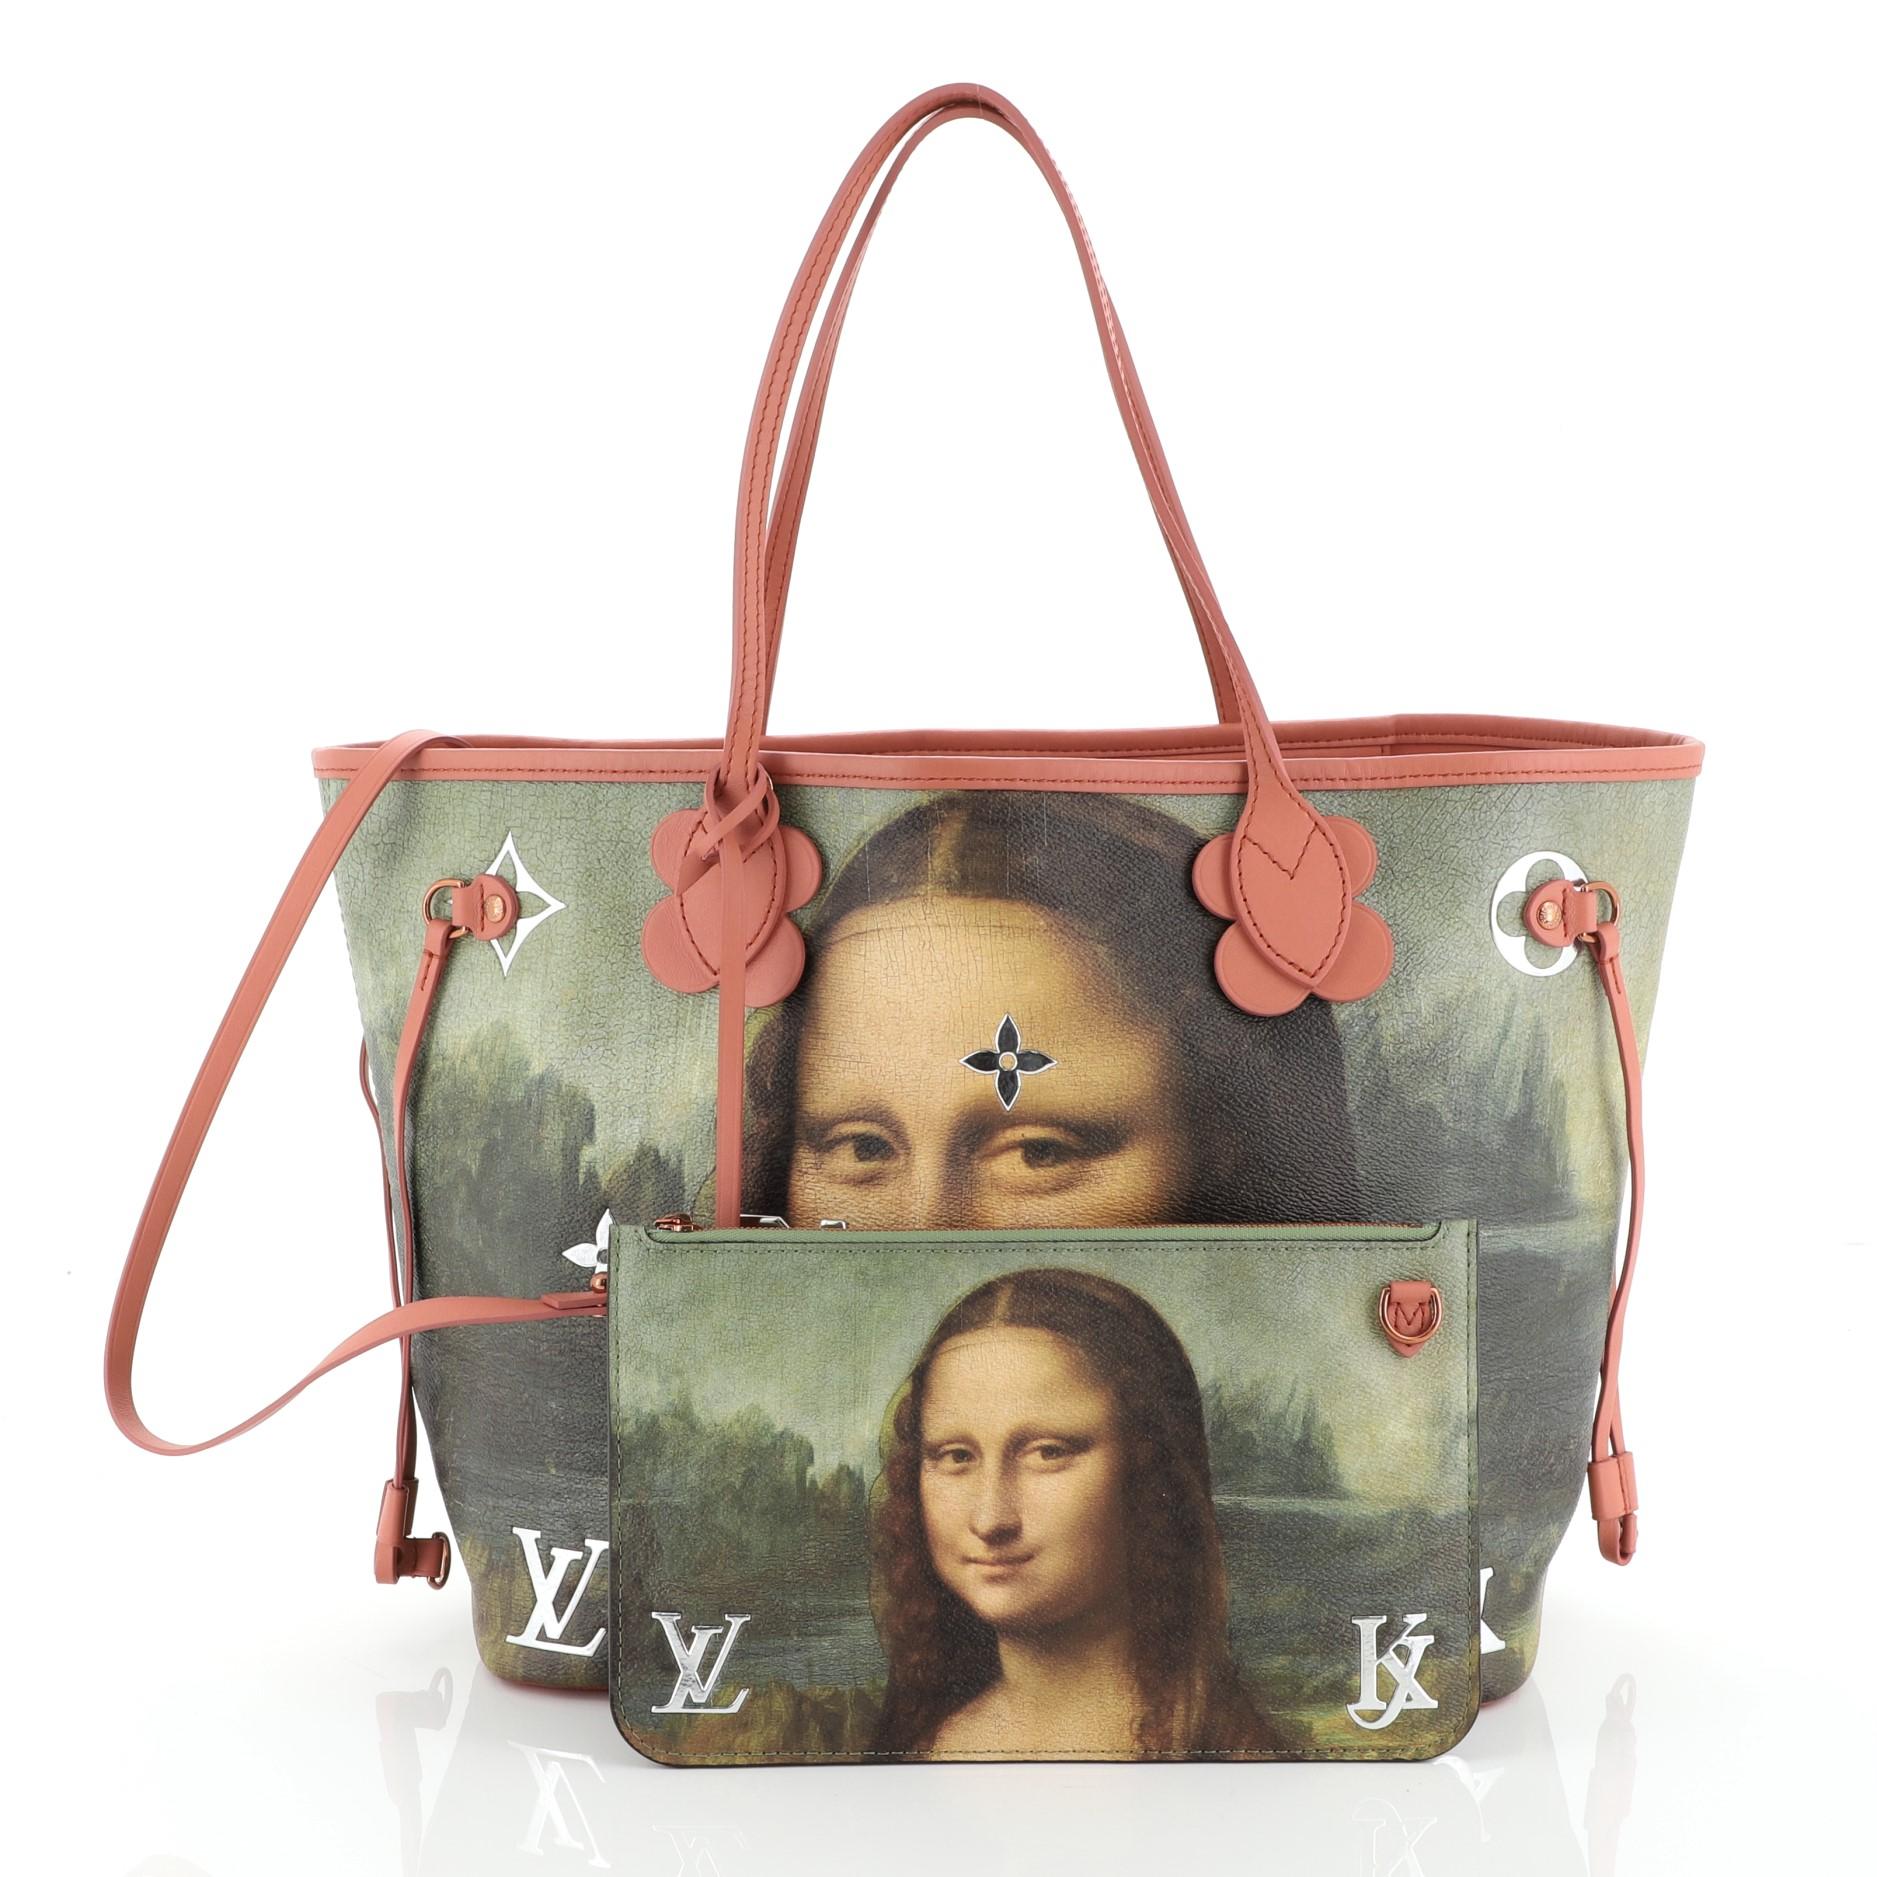 This Louis Vuitton Neverfull NM Tote Limited Edition Jeff Koons Da Vinci Print Canvas MM, crafted from pink printed coated canvas, features dual slim leather handles, monogram and flower applique, reflective metallic letters, and gold-tone hardware.